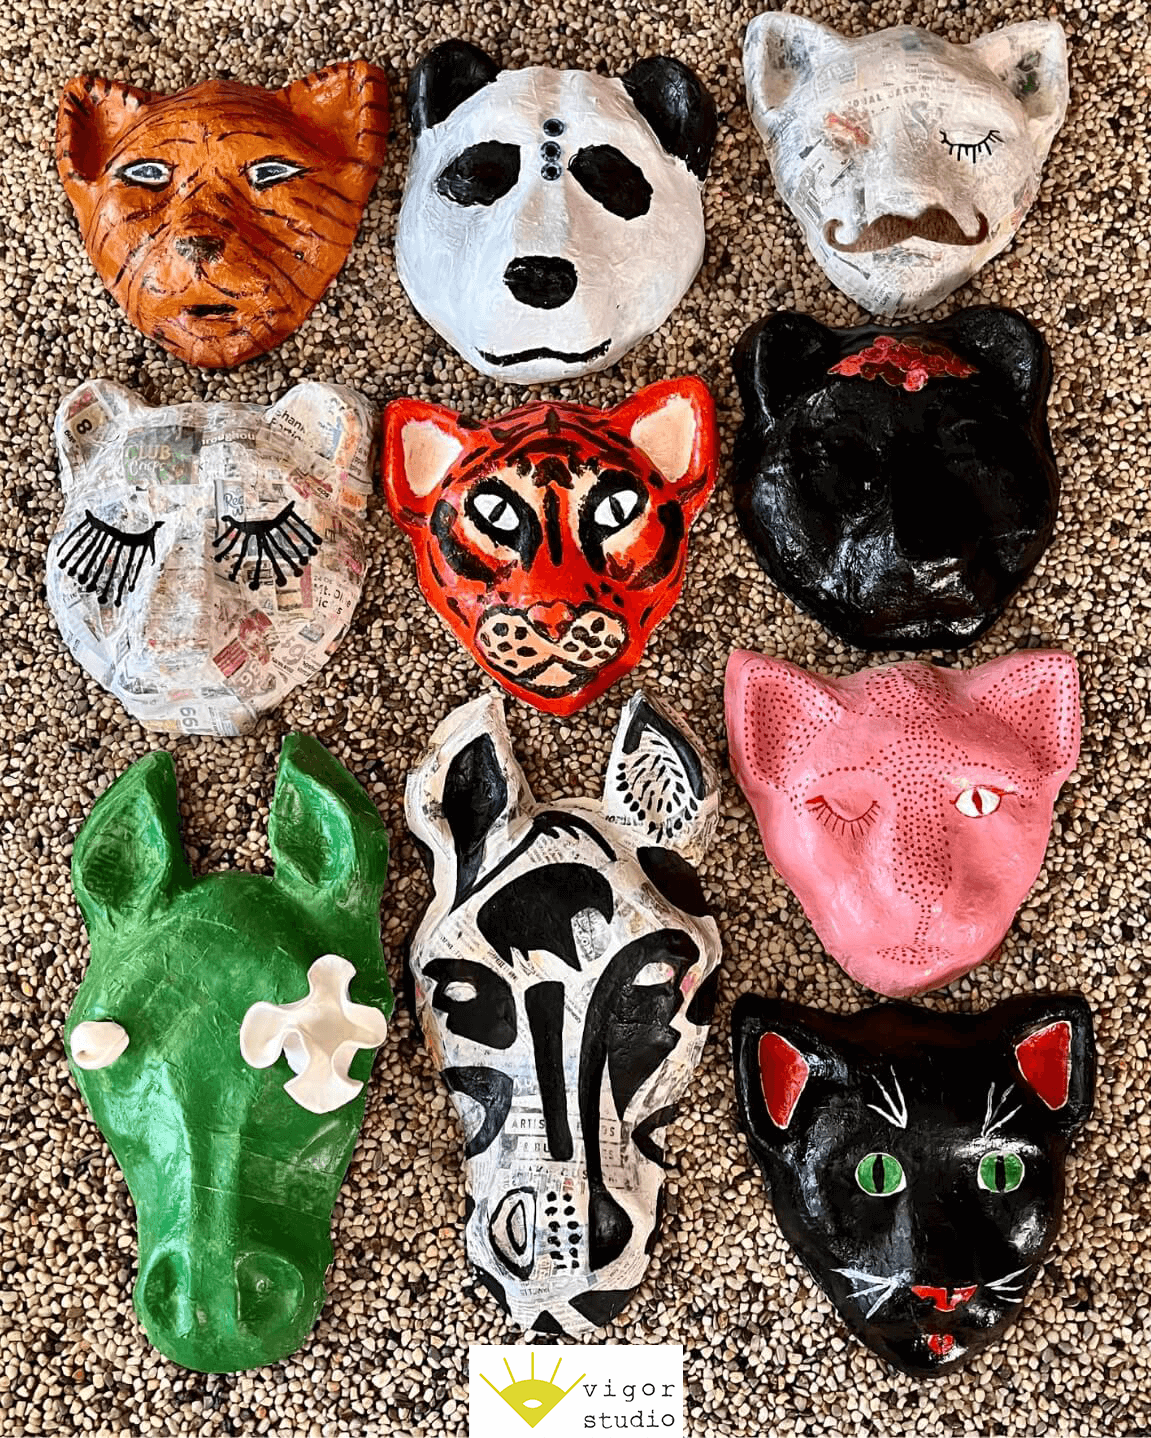 Animal masks made from paper-maché are lined up on the floor. They are a variety of zebras, bears, and tigers painted brightly.